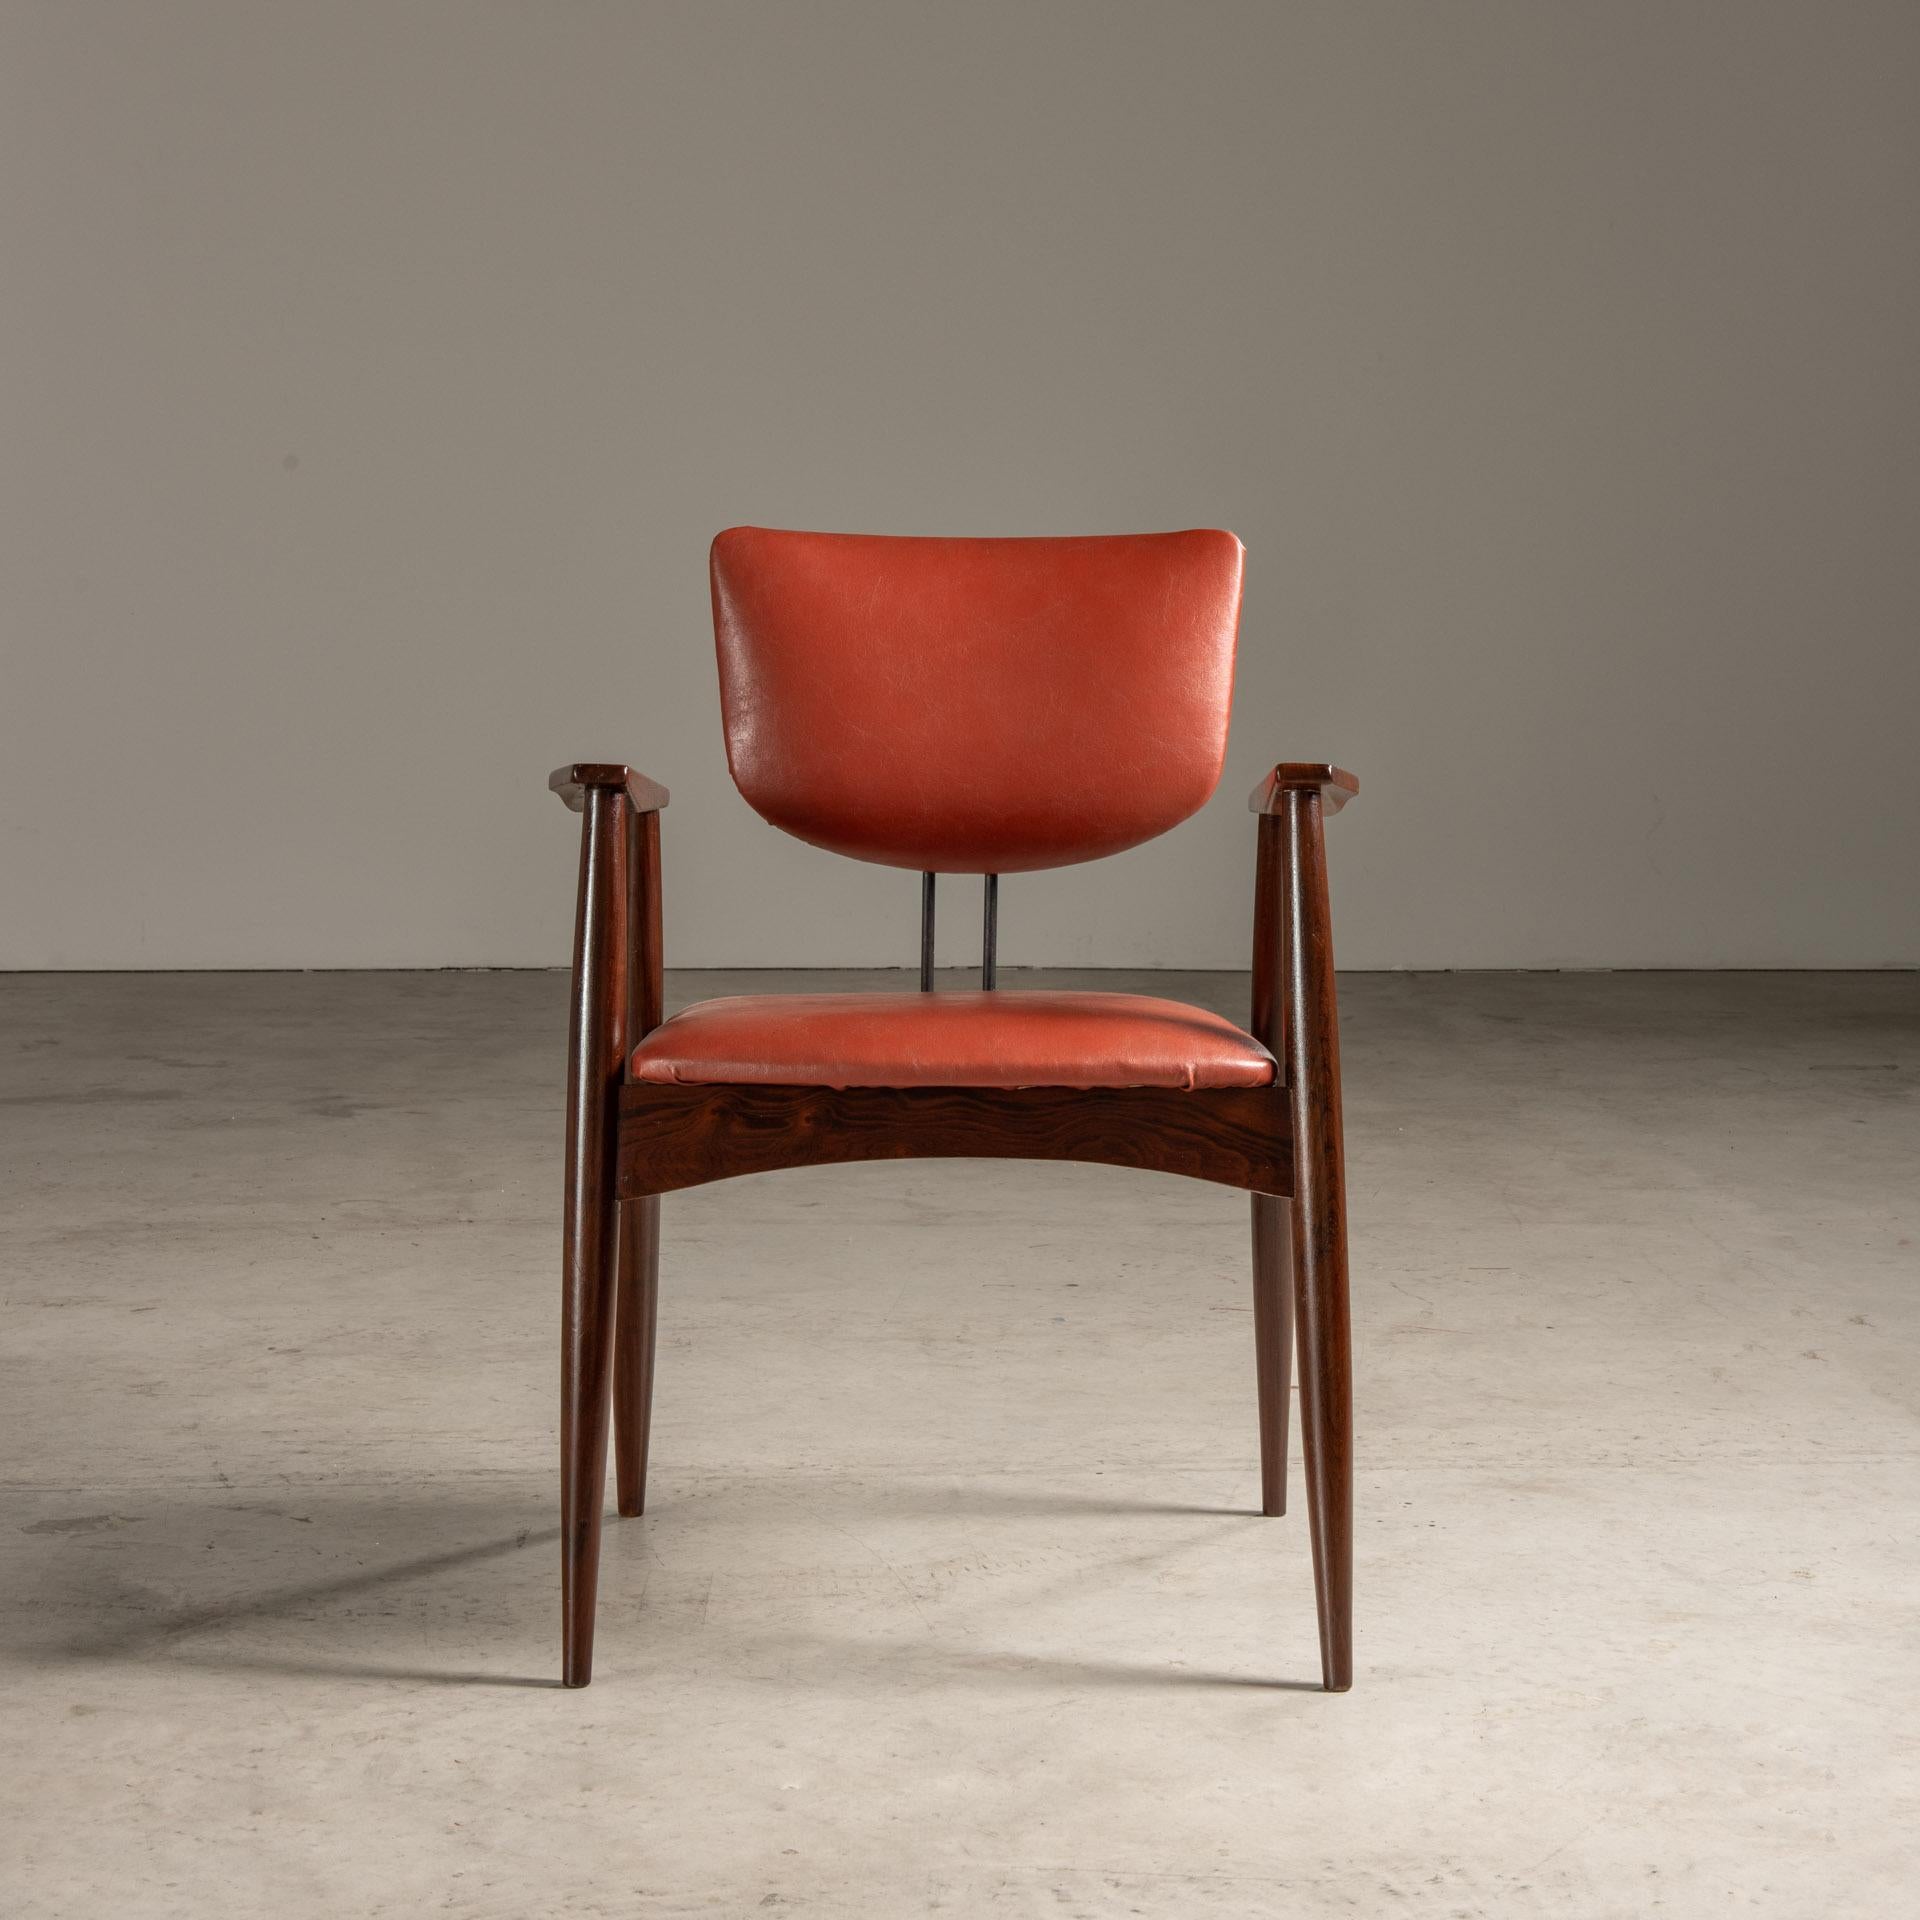 Chair in Wood, Iron and Leather, by Michel Arnoult, Brazilian Mid-Century Modern For Sale 2